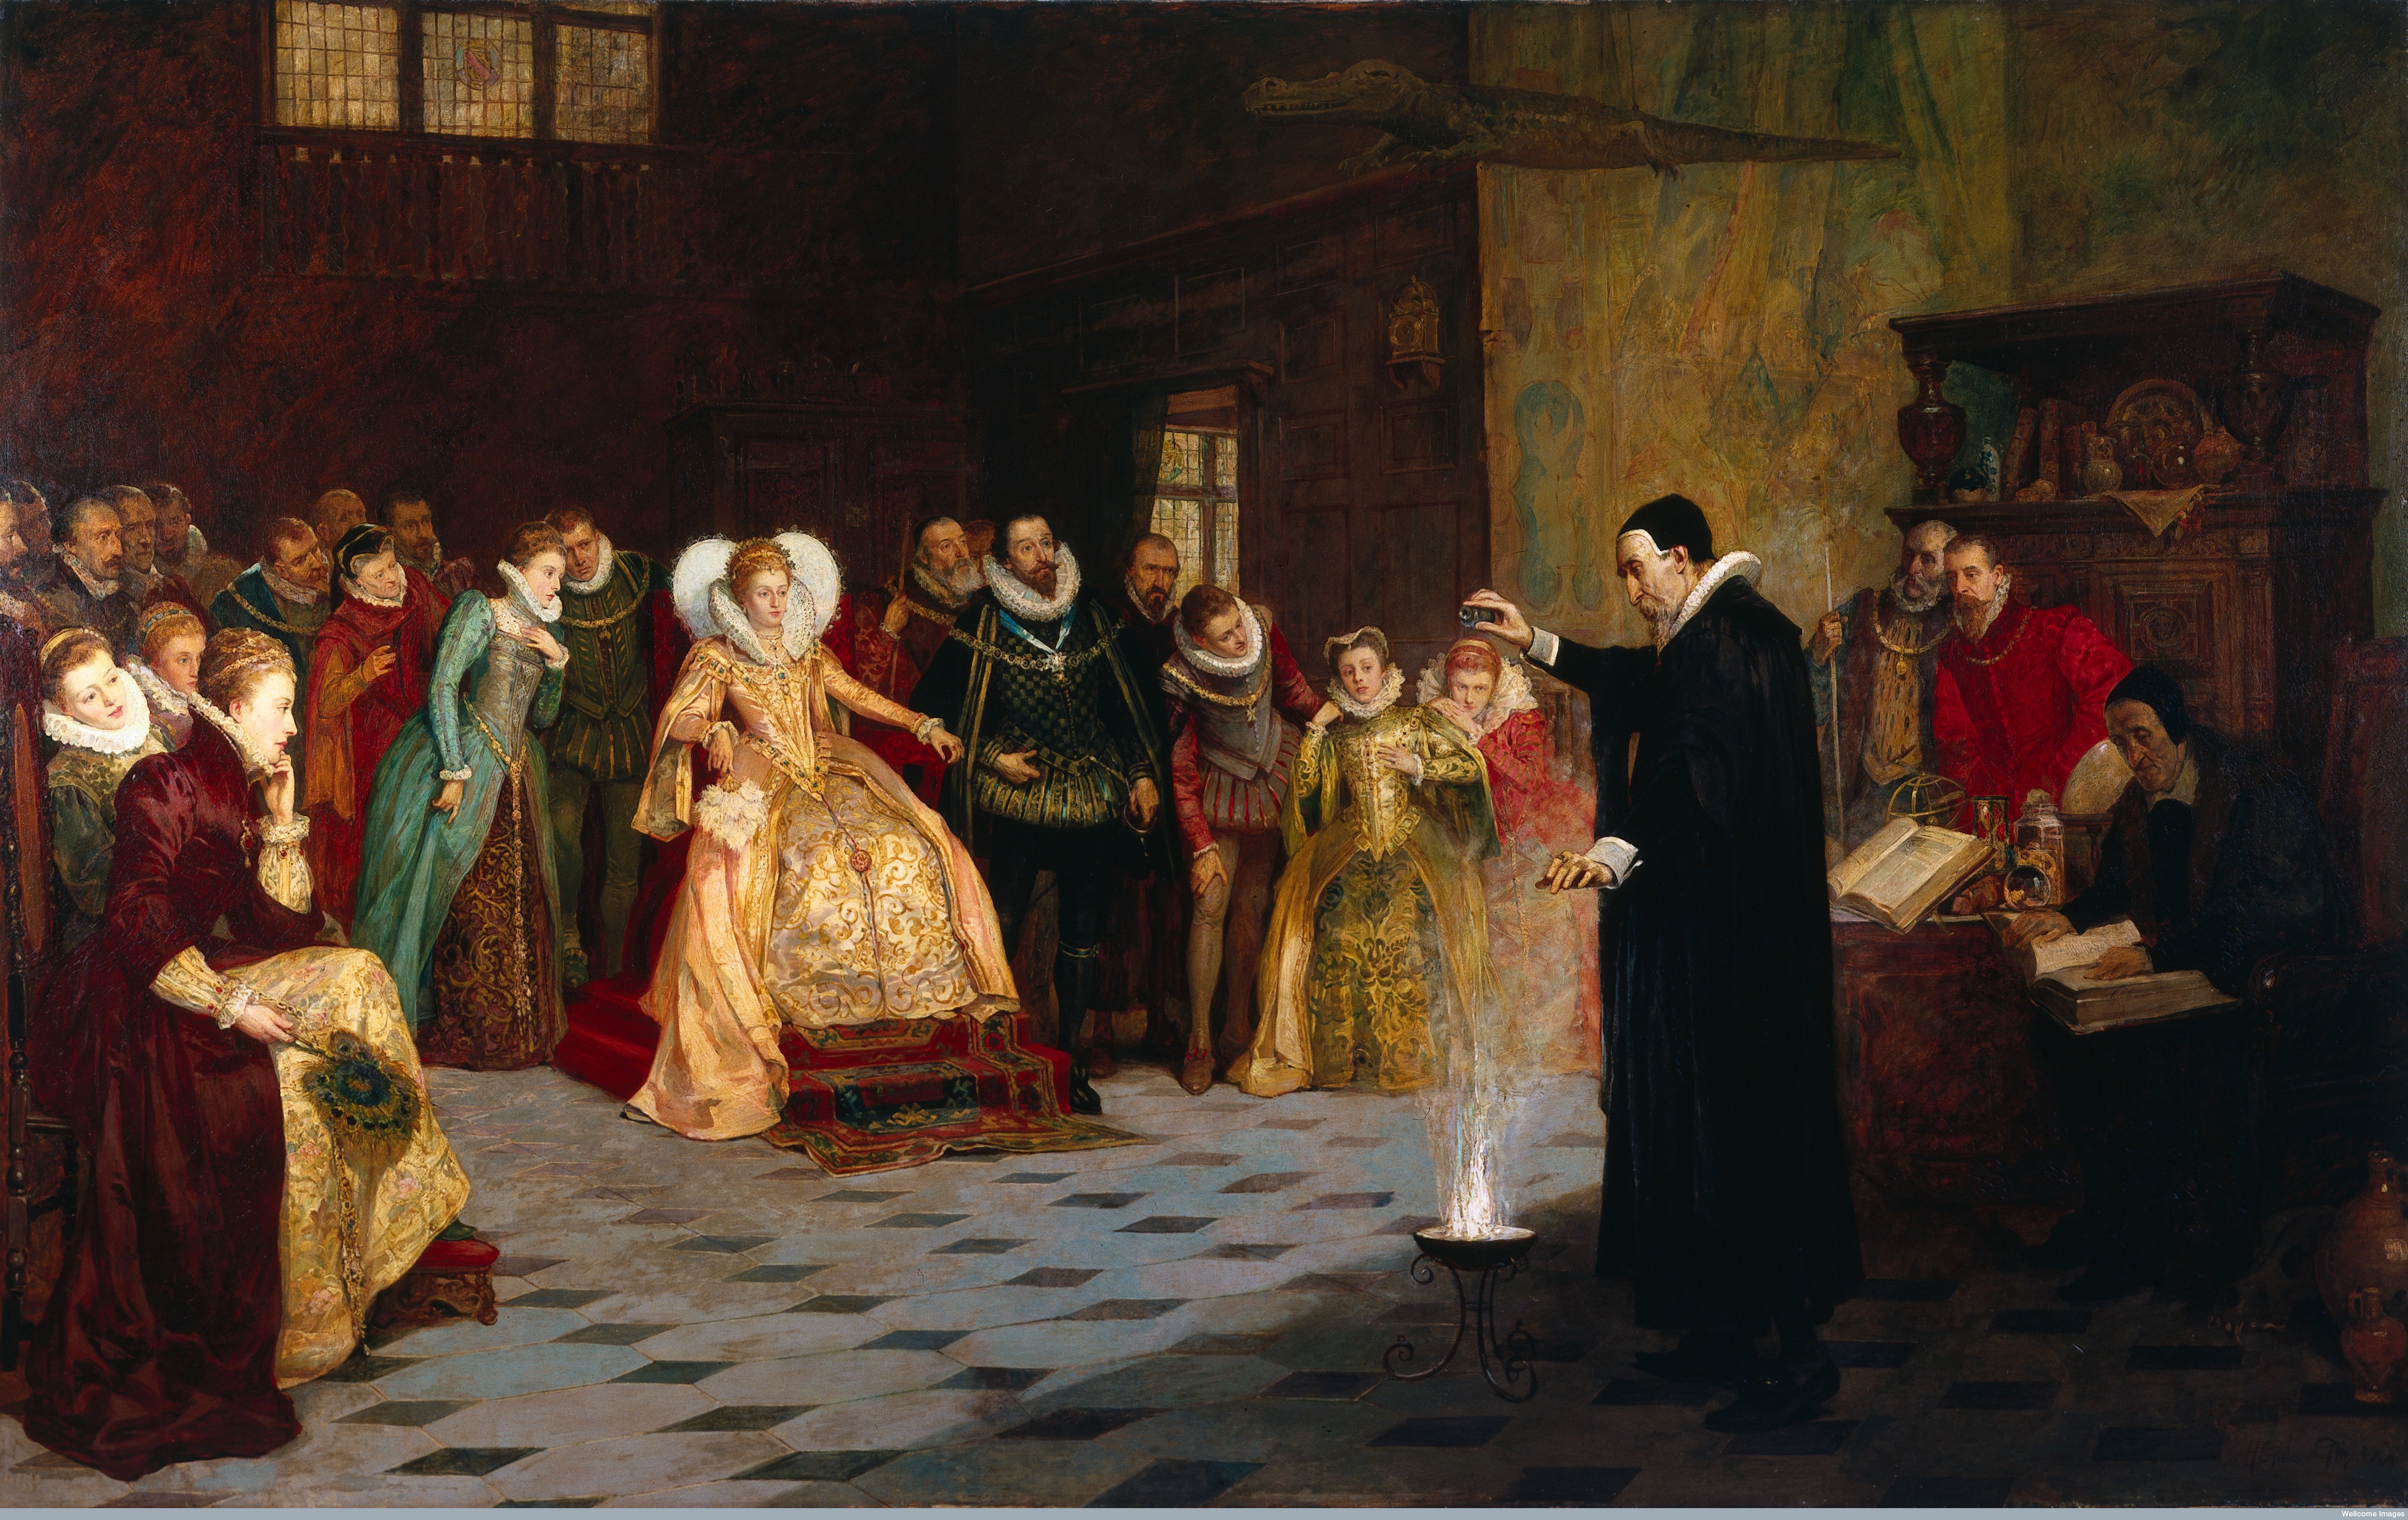 John Dee performing an experiment before Queen Elizabeth I. Oil painting by Henry Gillard Glindoni, late 19th century. Wellcome Library, London